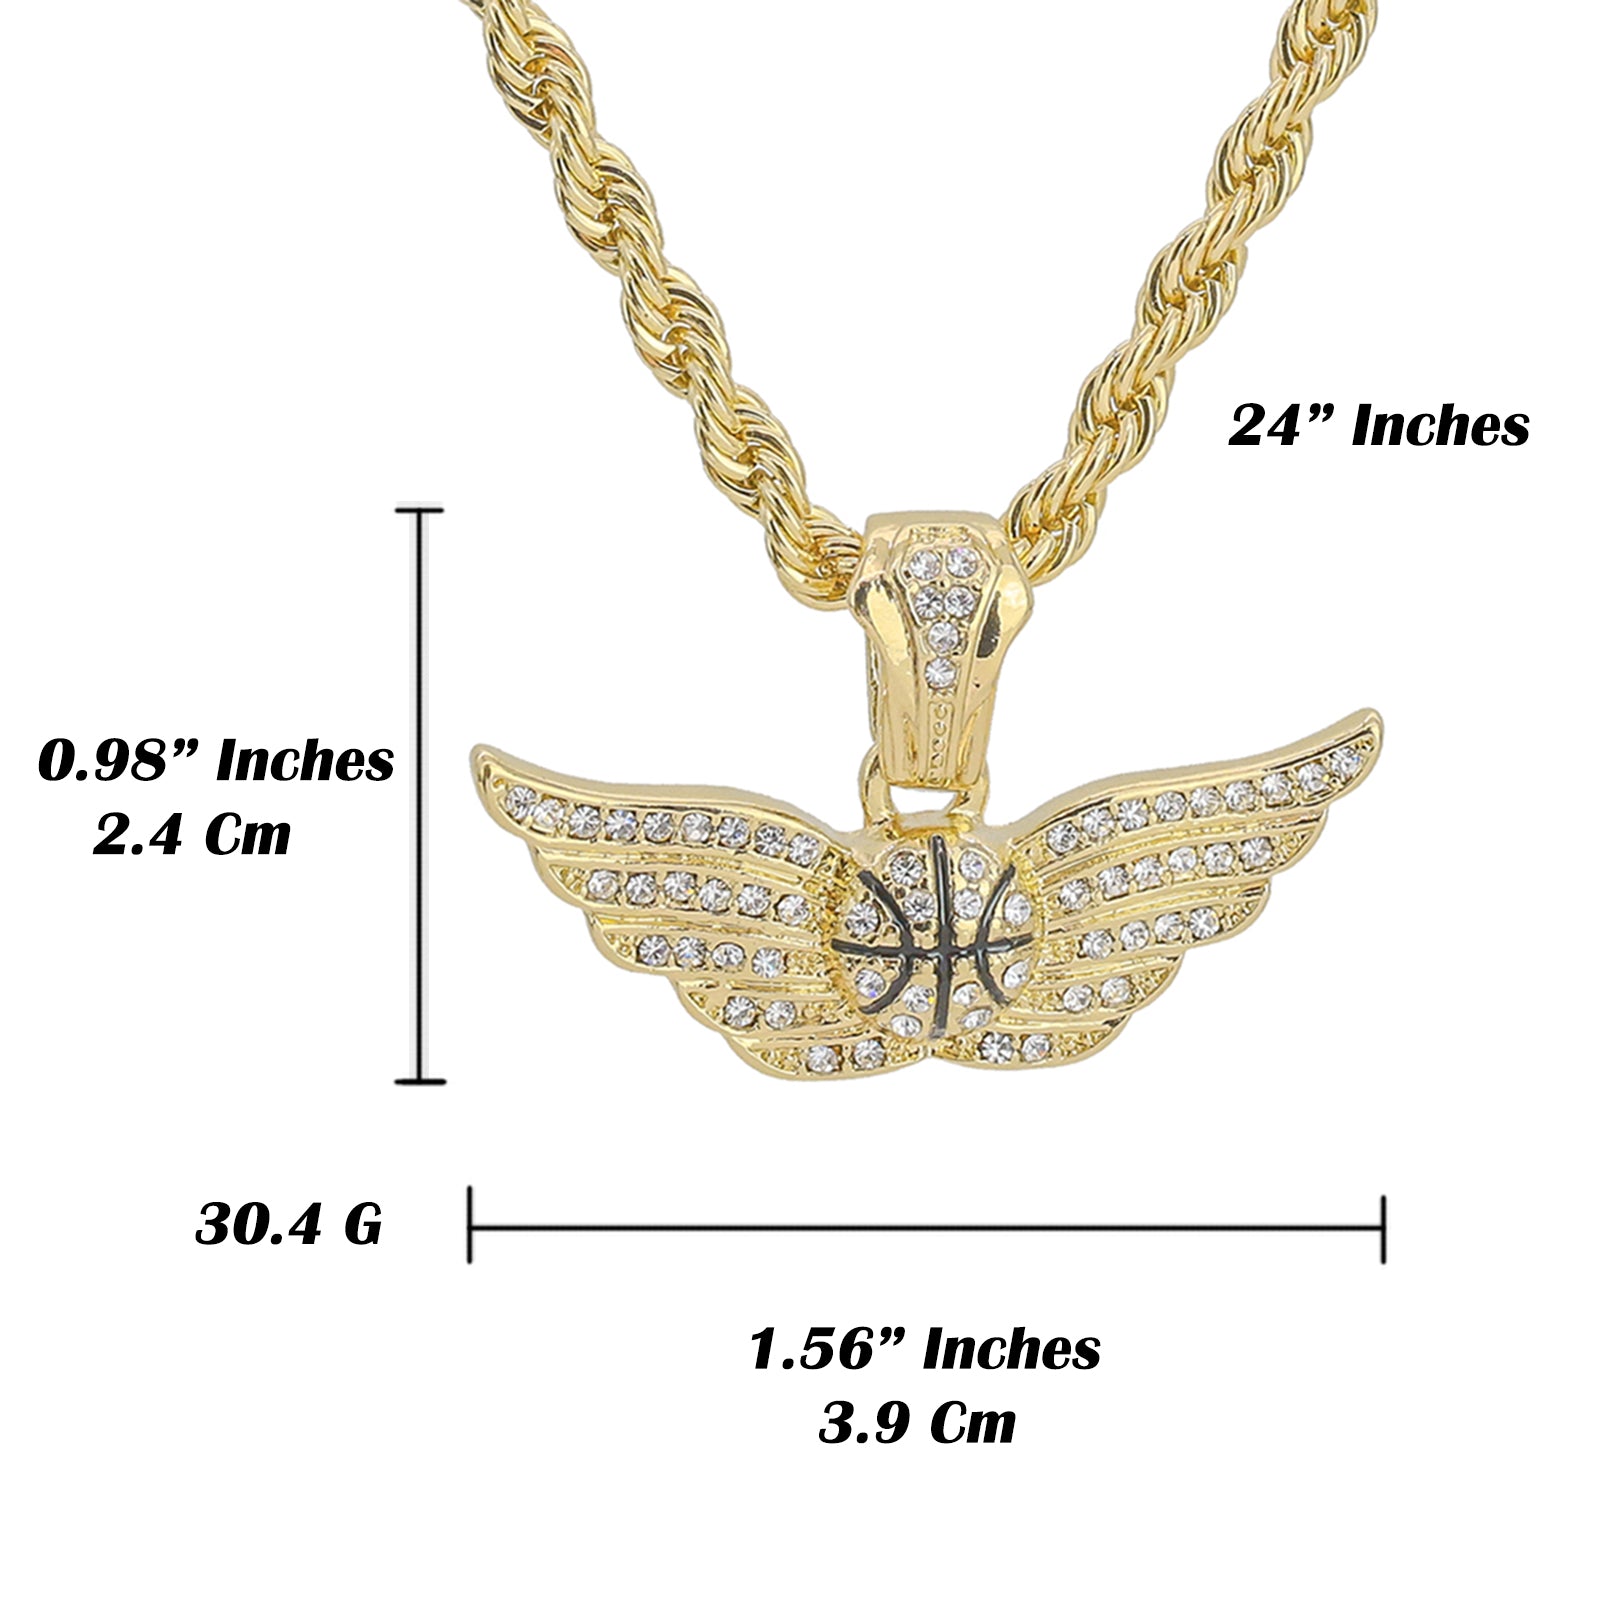 Winged Basketball Pendant Rope Chain Men's Hip Hop 18k Cz Jewelry Necklace Choker